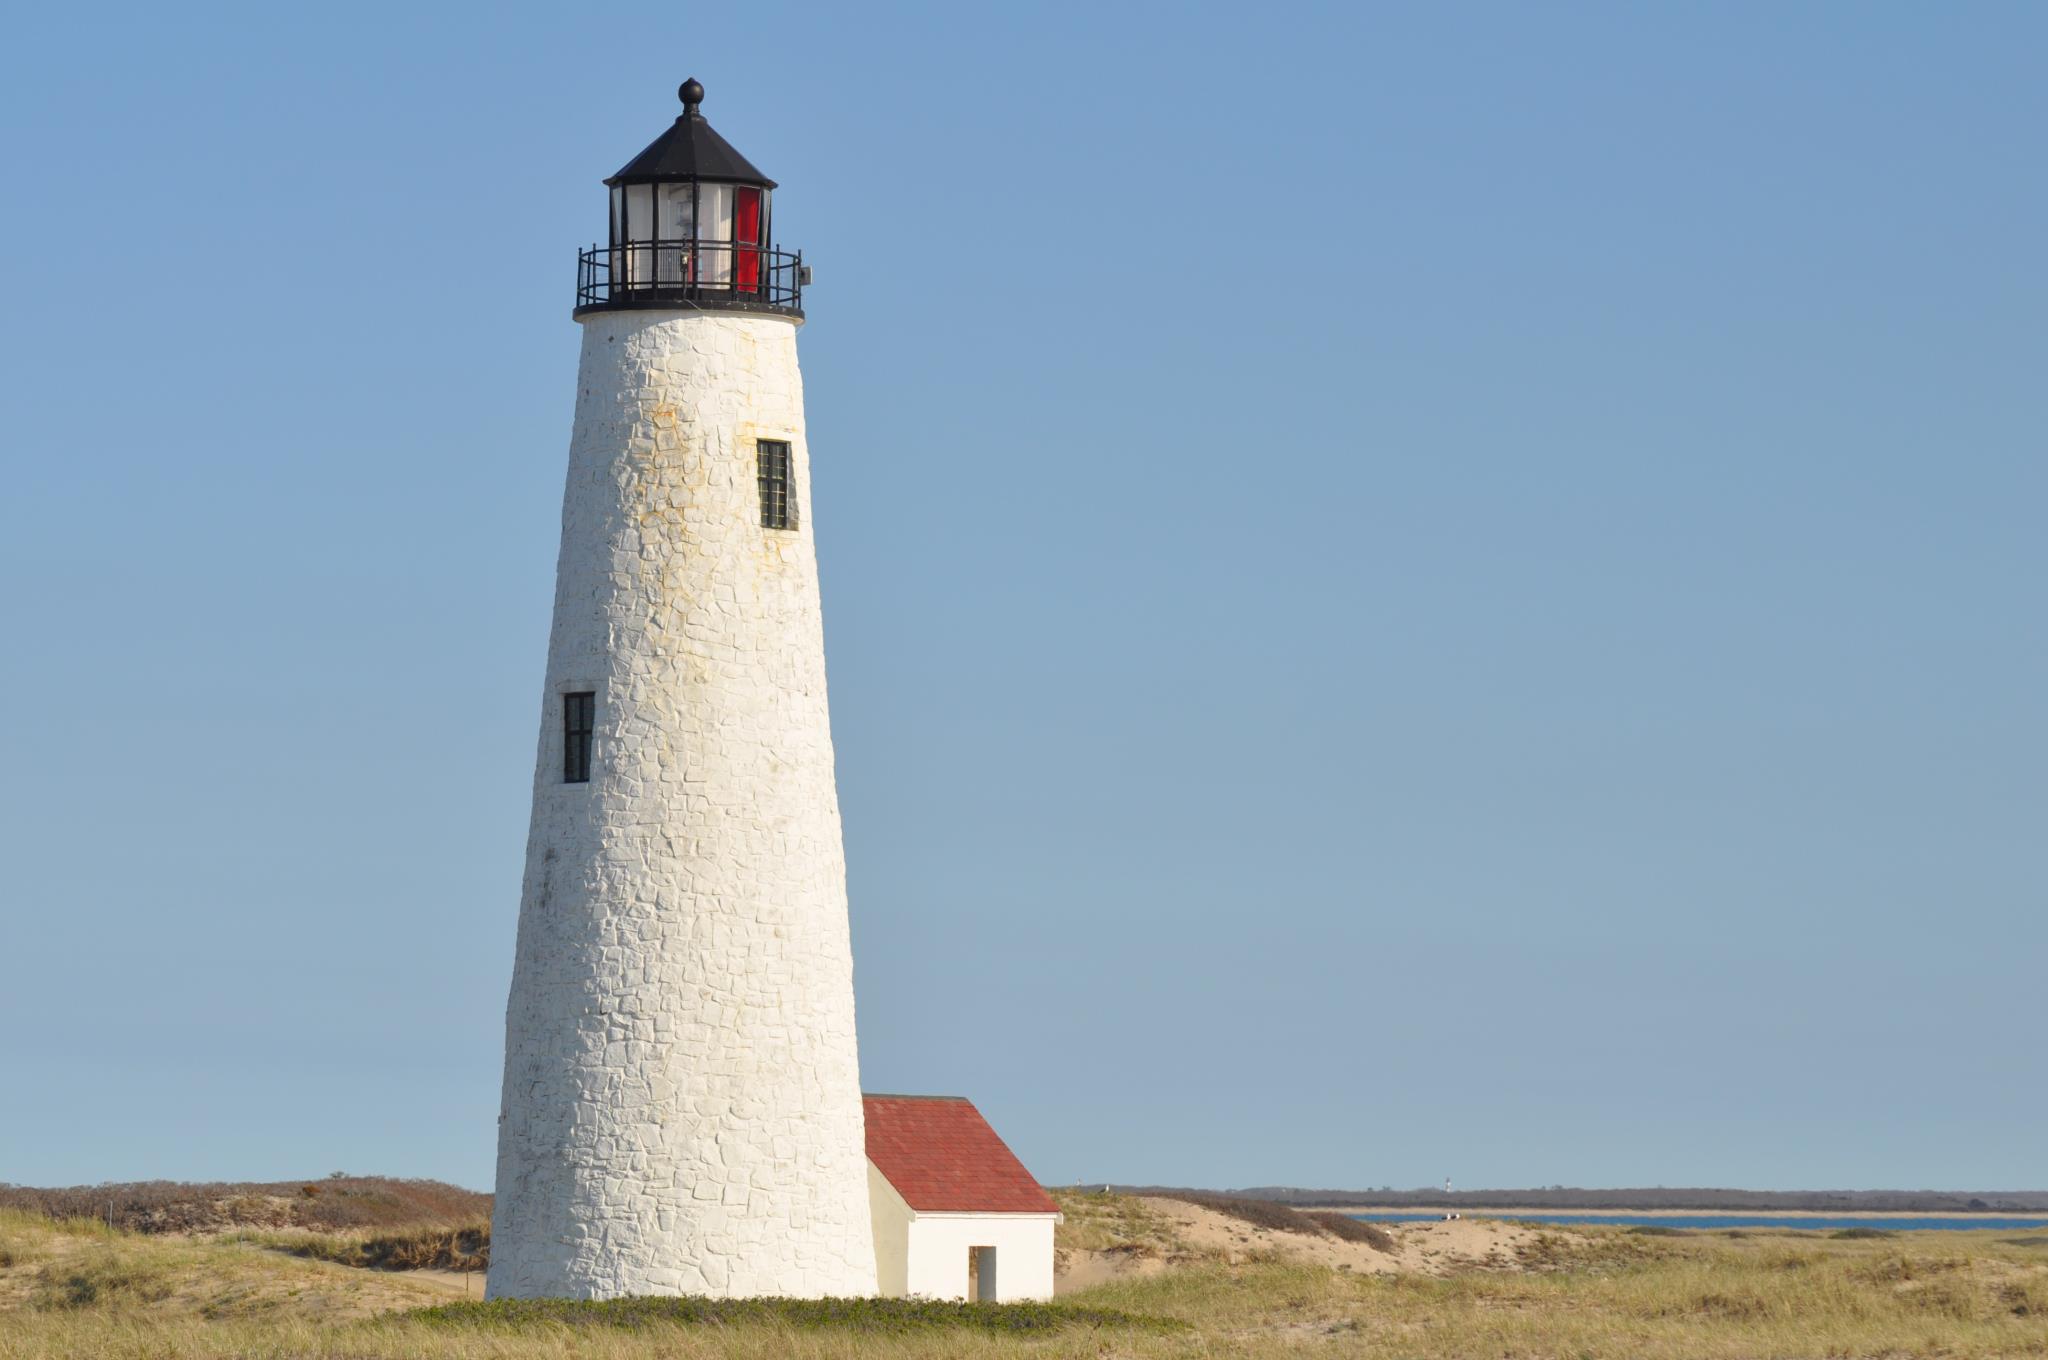 11 interesting facts about USFWS lighthouses | U.S. Fish and ...